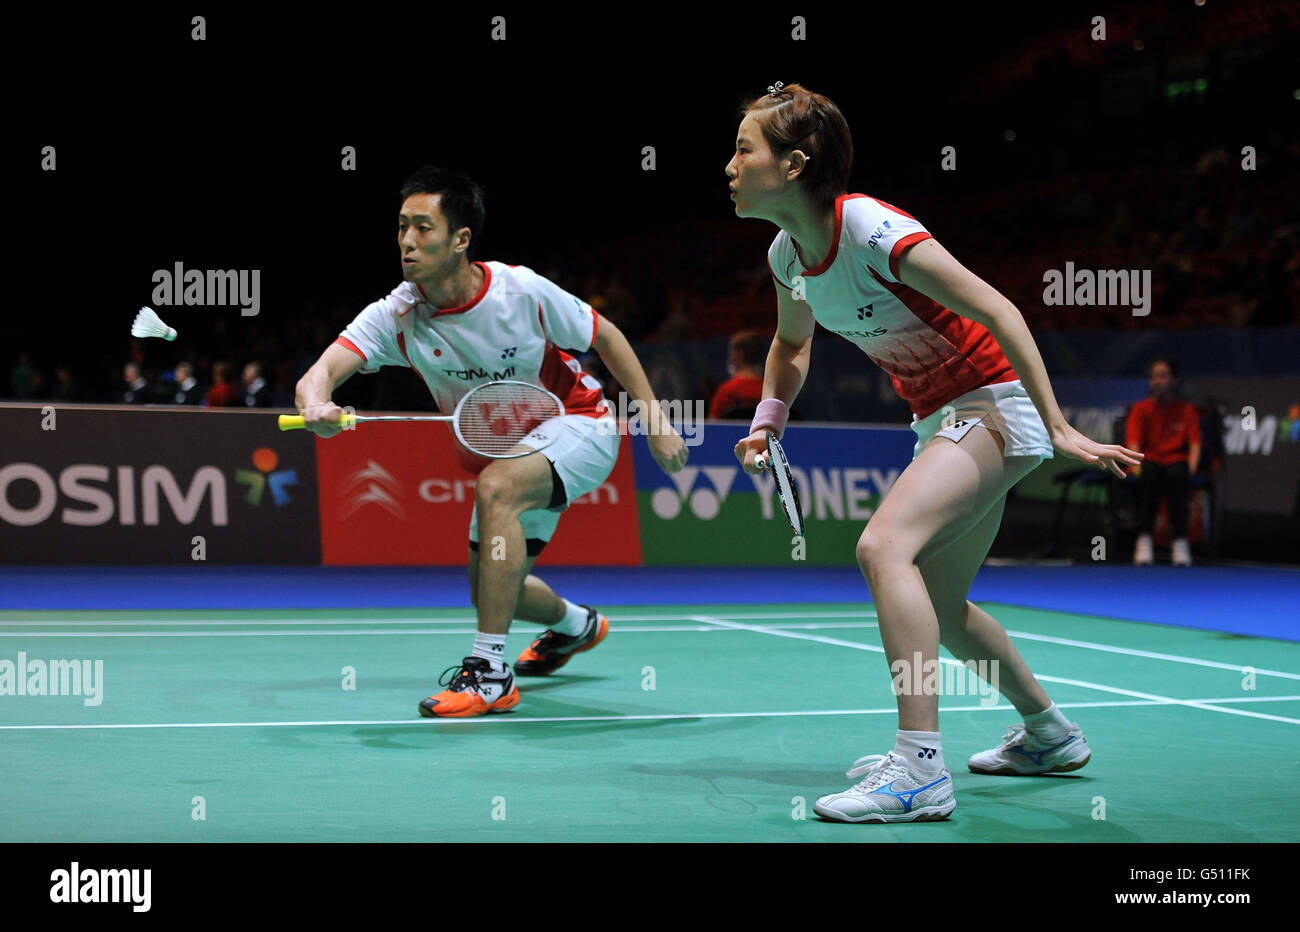 Japans Noriyasu Hirata and Miyuki Maeda (right) during their second round mixed doubles qualification match against Englands Marcus Ellis and Heather Olver (not pictured) during the Yonex All England Badminton Championships at